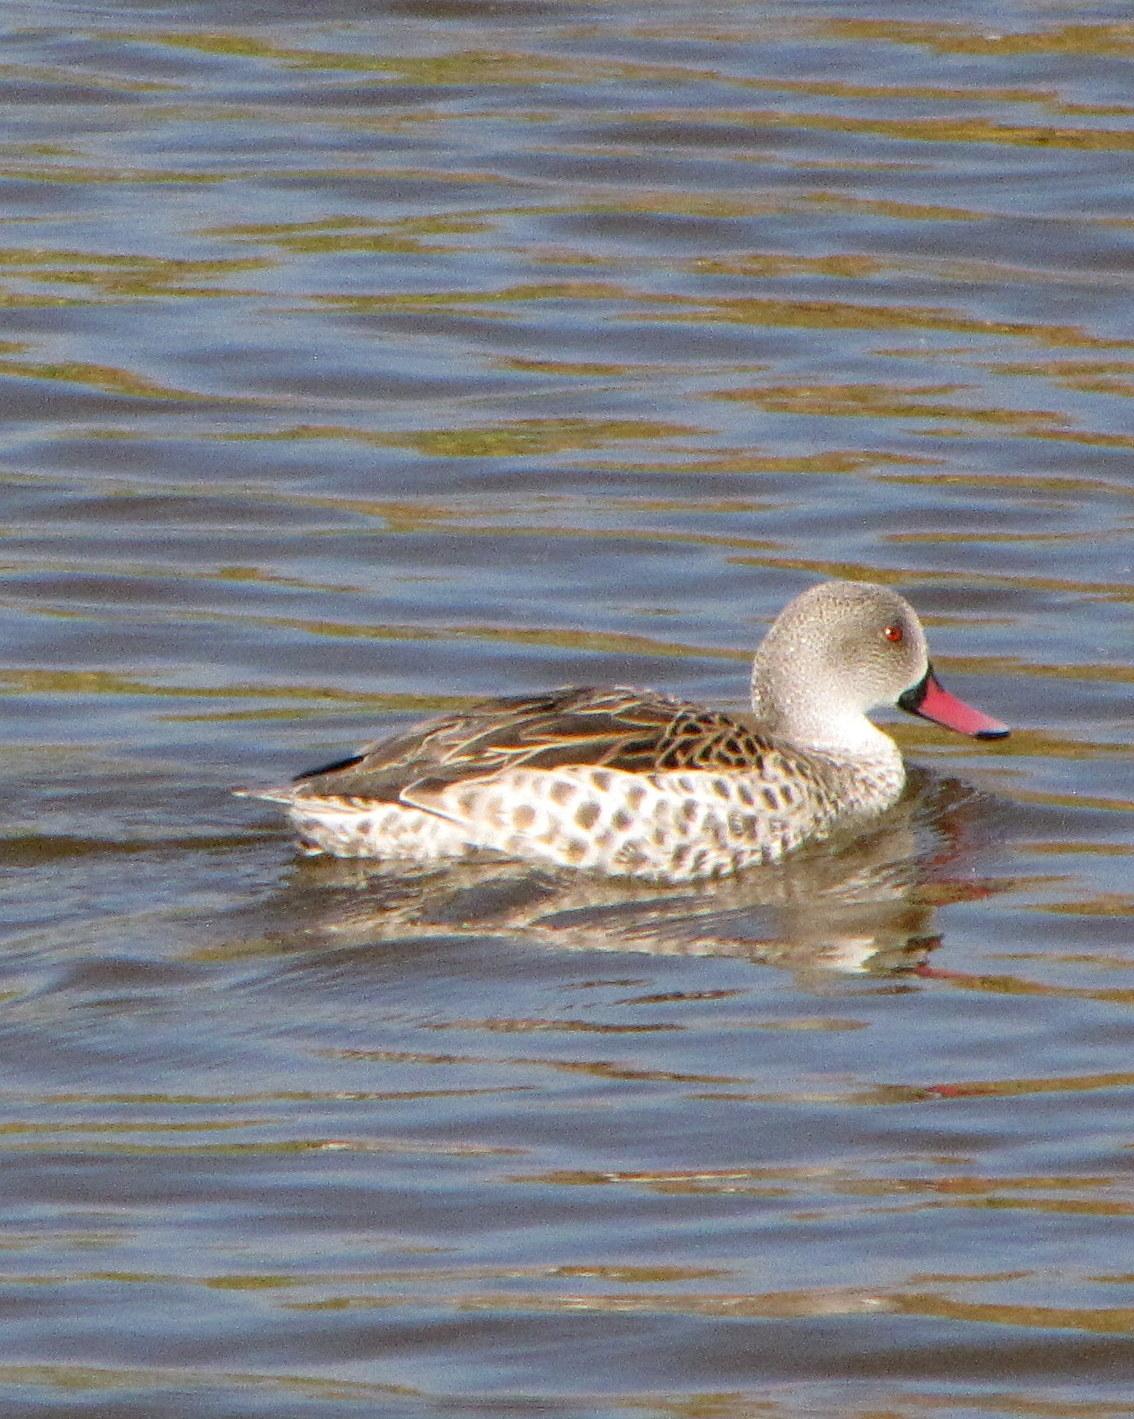 Cape Teal Photo by Richard  Lowe